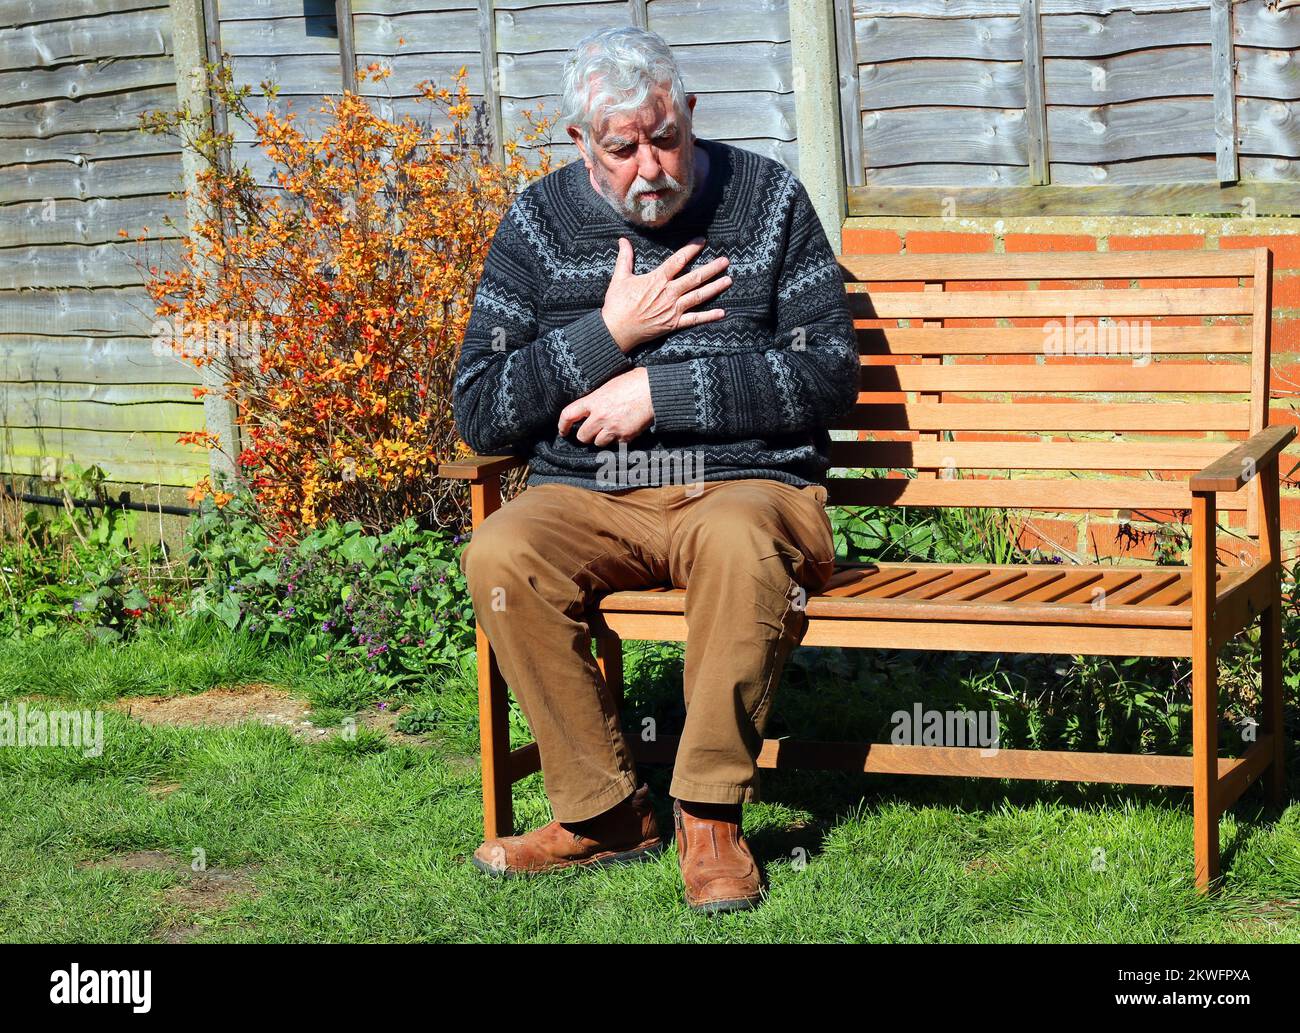 Senior or elderly man clutching his chest in pain. Heart attack, angina or chest problems. Stock Photo